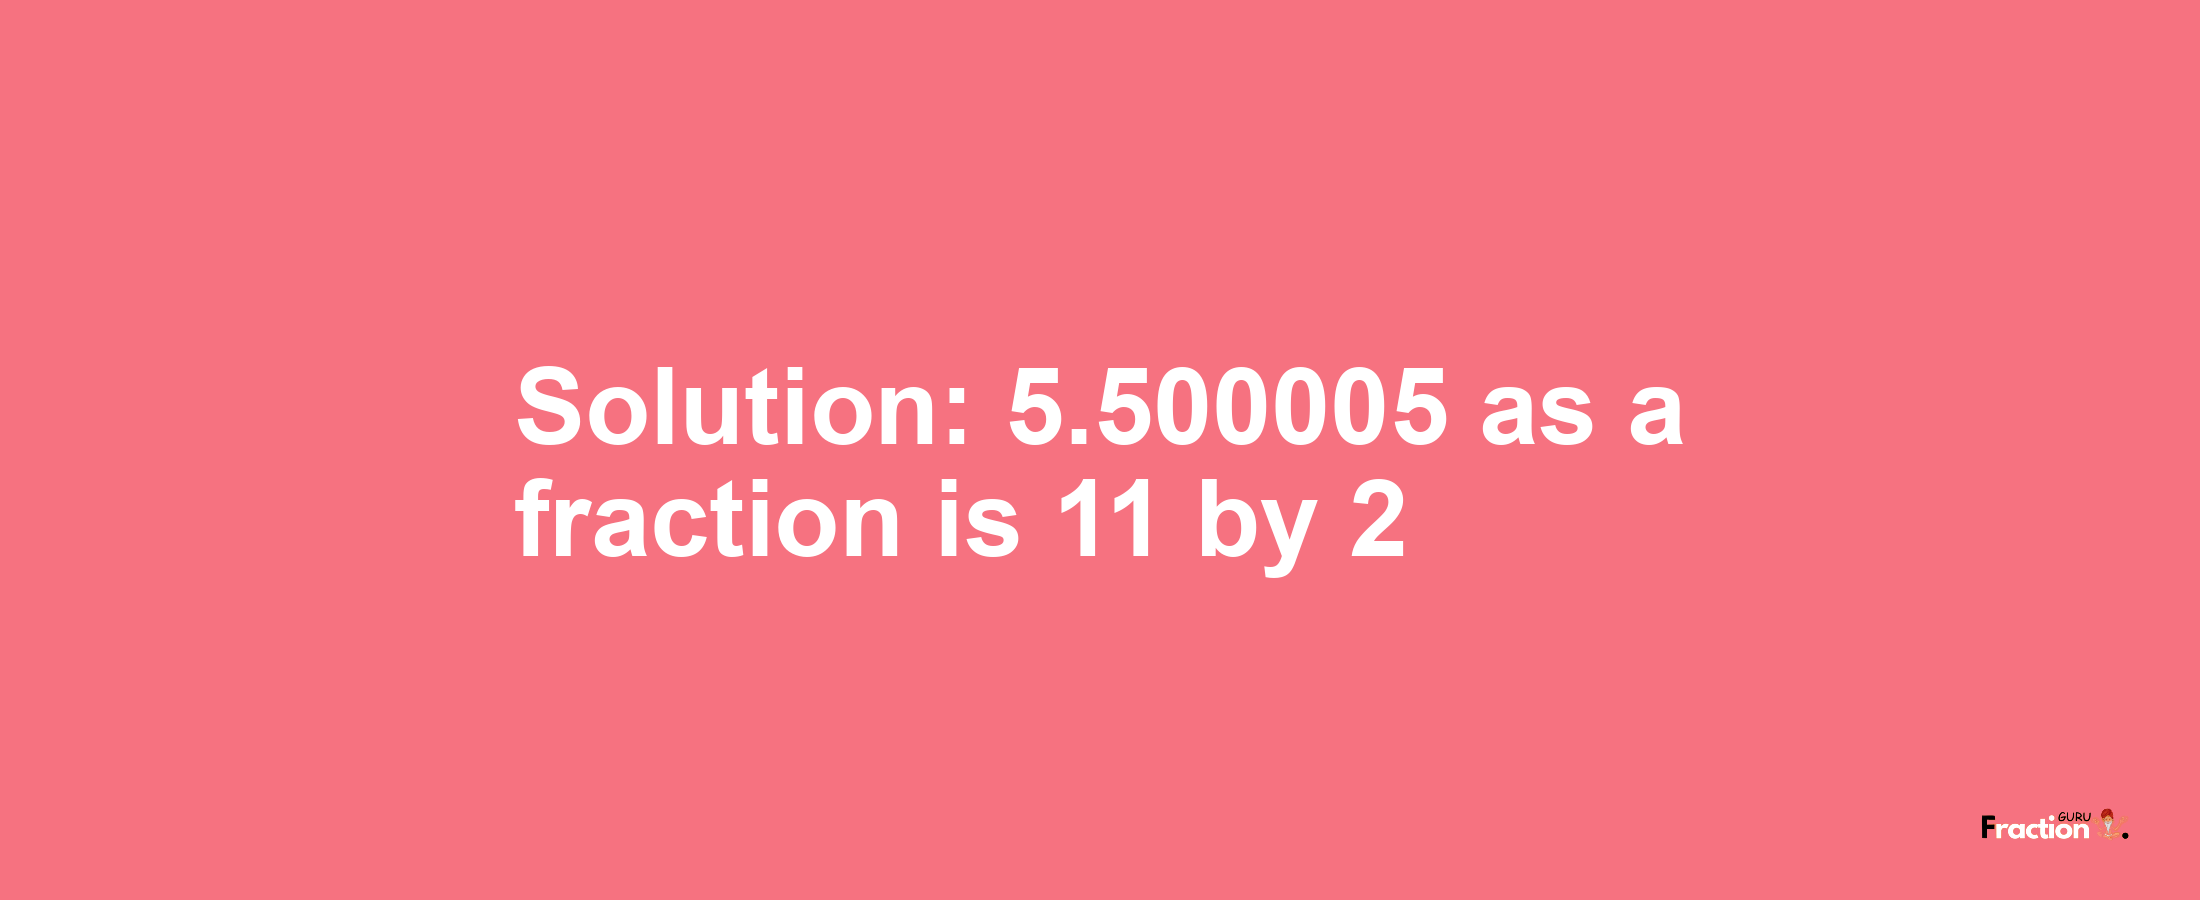 Solution:5.500005 as a fraction is 11/2